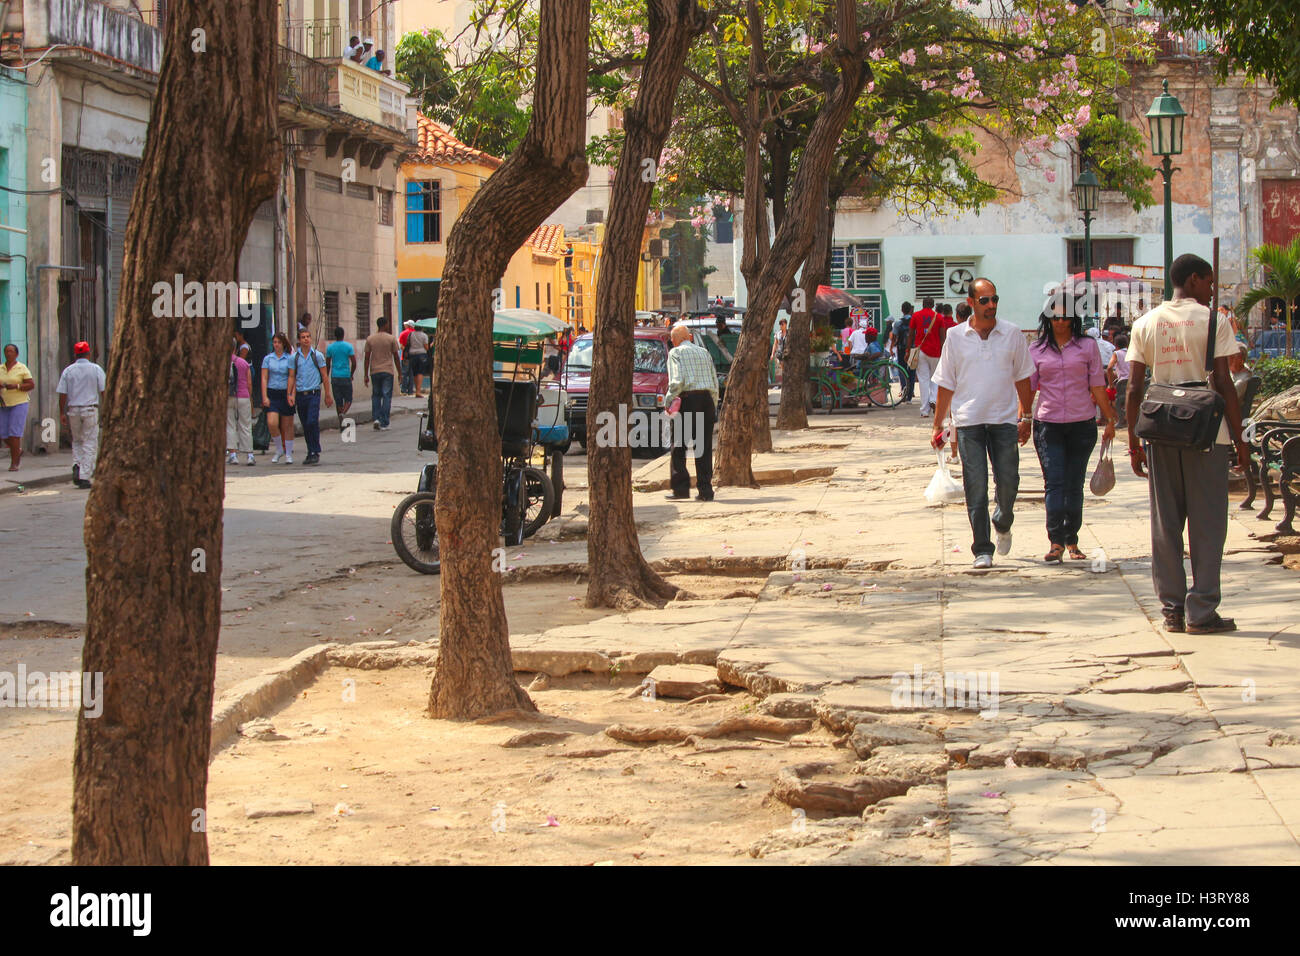 People walking in a street with holes in it in the center of Havana, Cuba Stock Photo